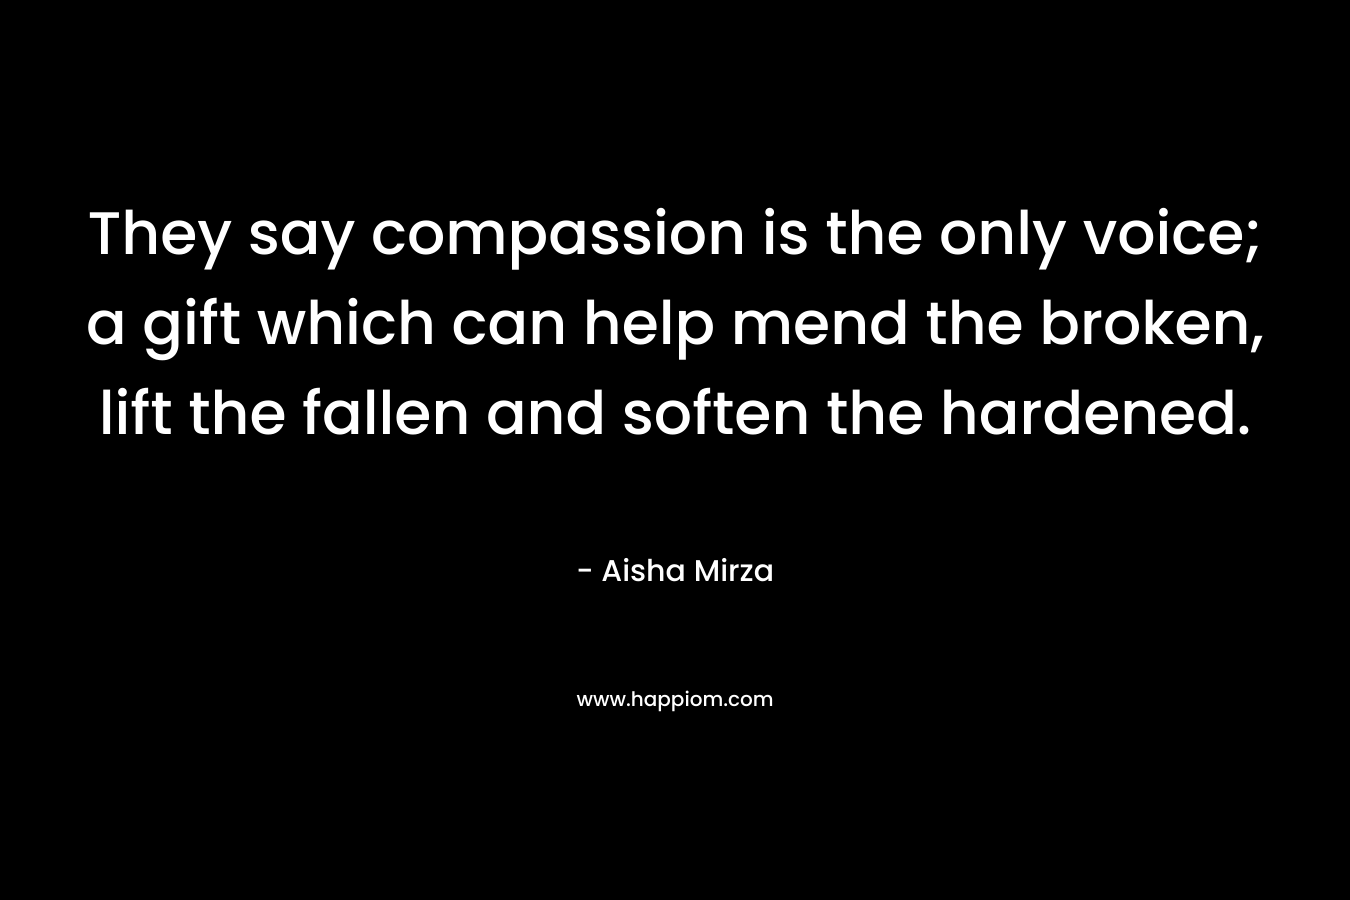 They say compassion is the only voice; a gift which can help mend the broken, lift the fallen and soften the hardened. – Aisha Mirza